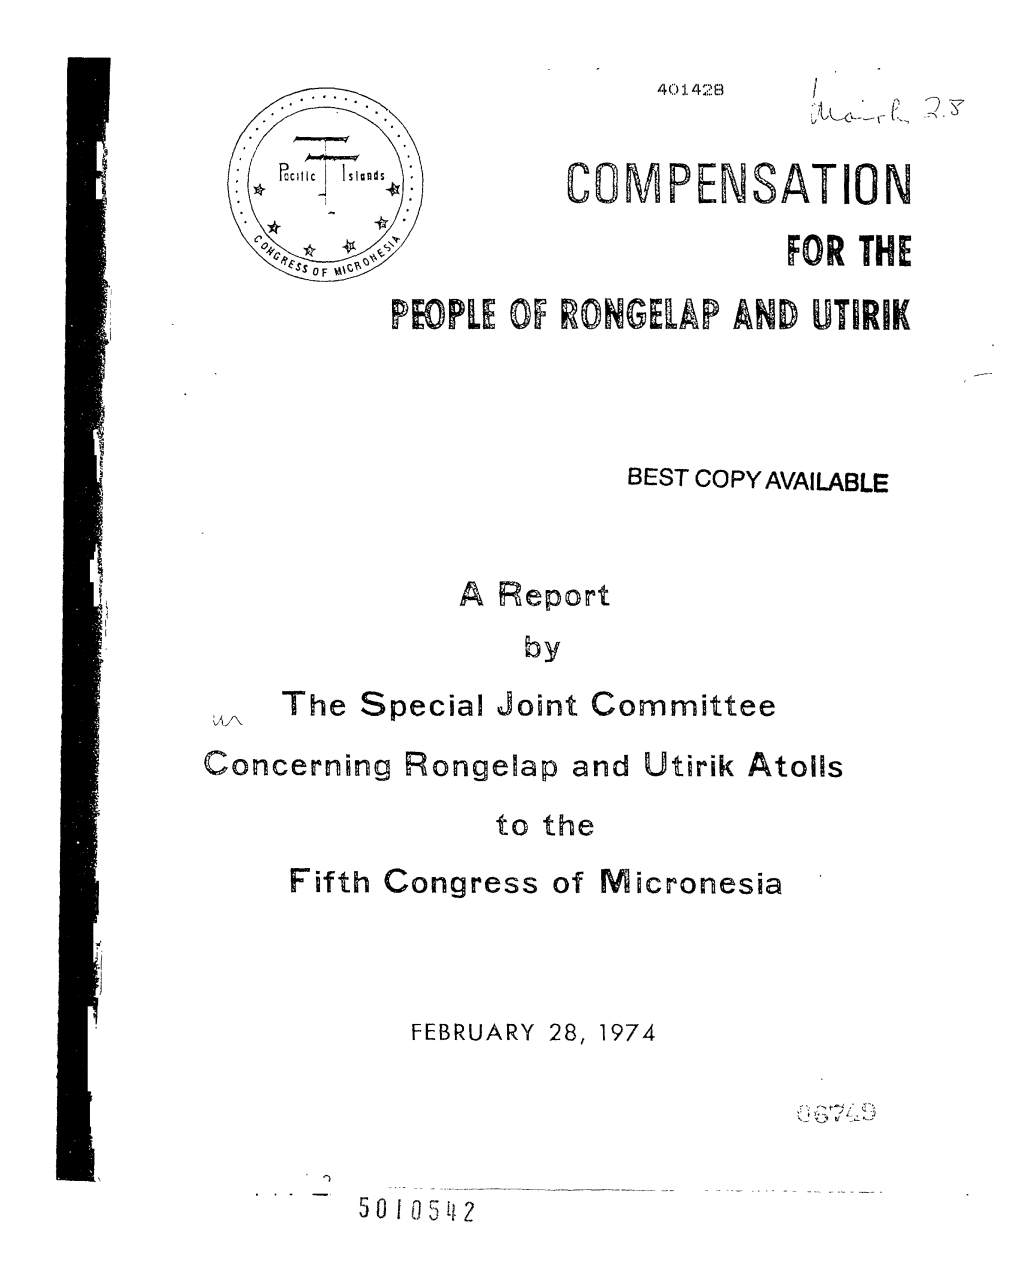 Compensation for the People of Rongelap and Utirik